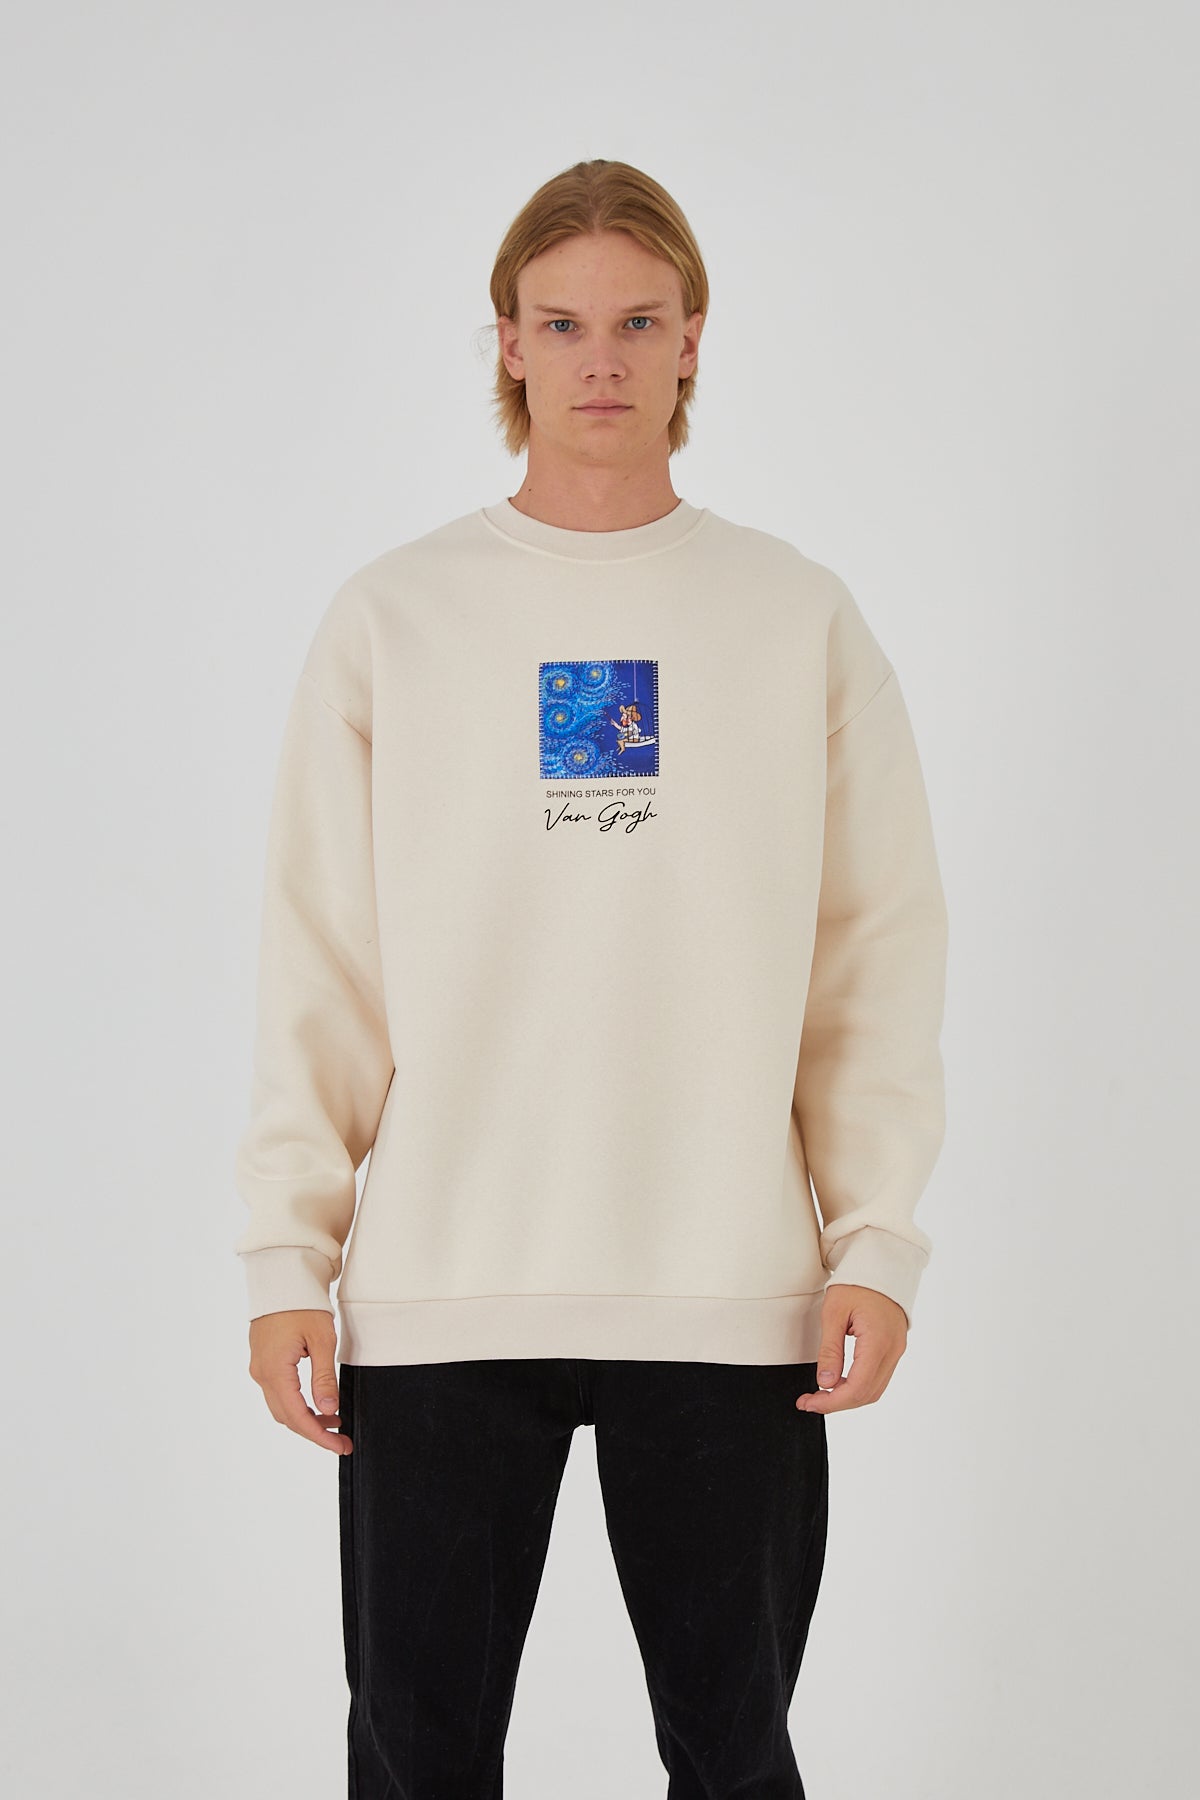 SWEATER - SHINING STARS FOR YOU - OFF WHITE - DYS-Amsterdam